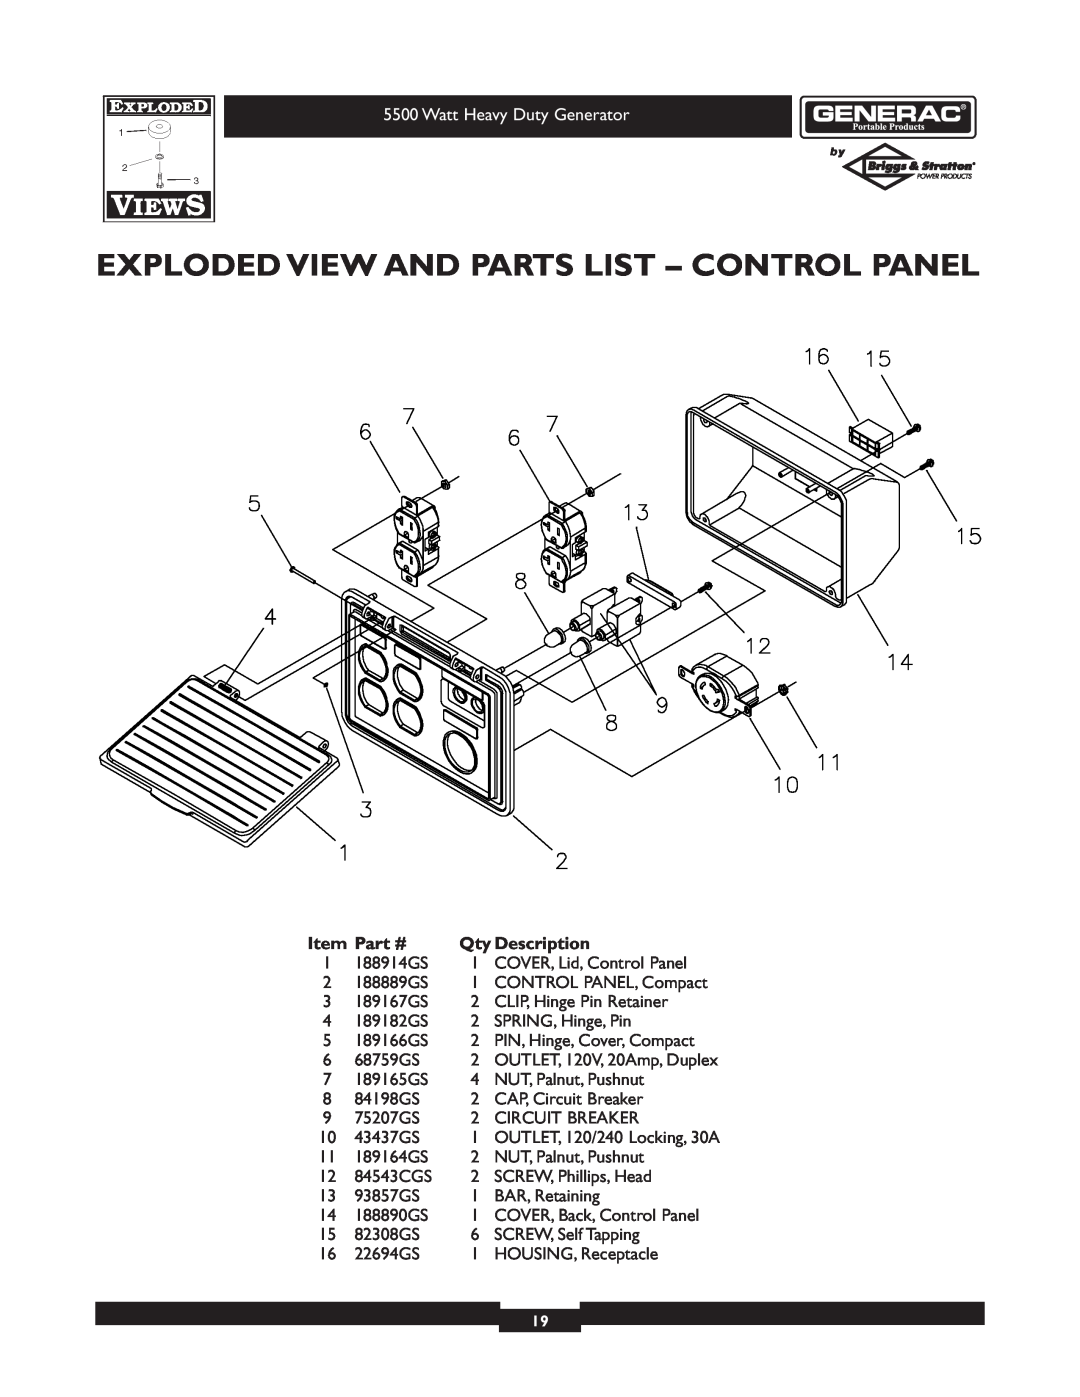 Generac 1654-0 owner manual Exploded View And Parts List - Control Panel, Qty Description 